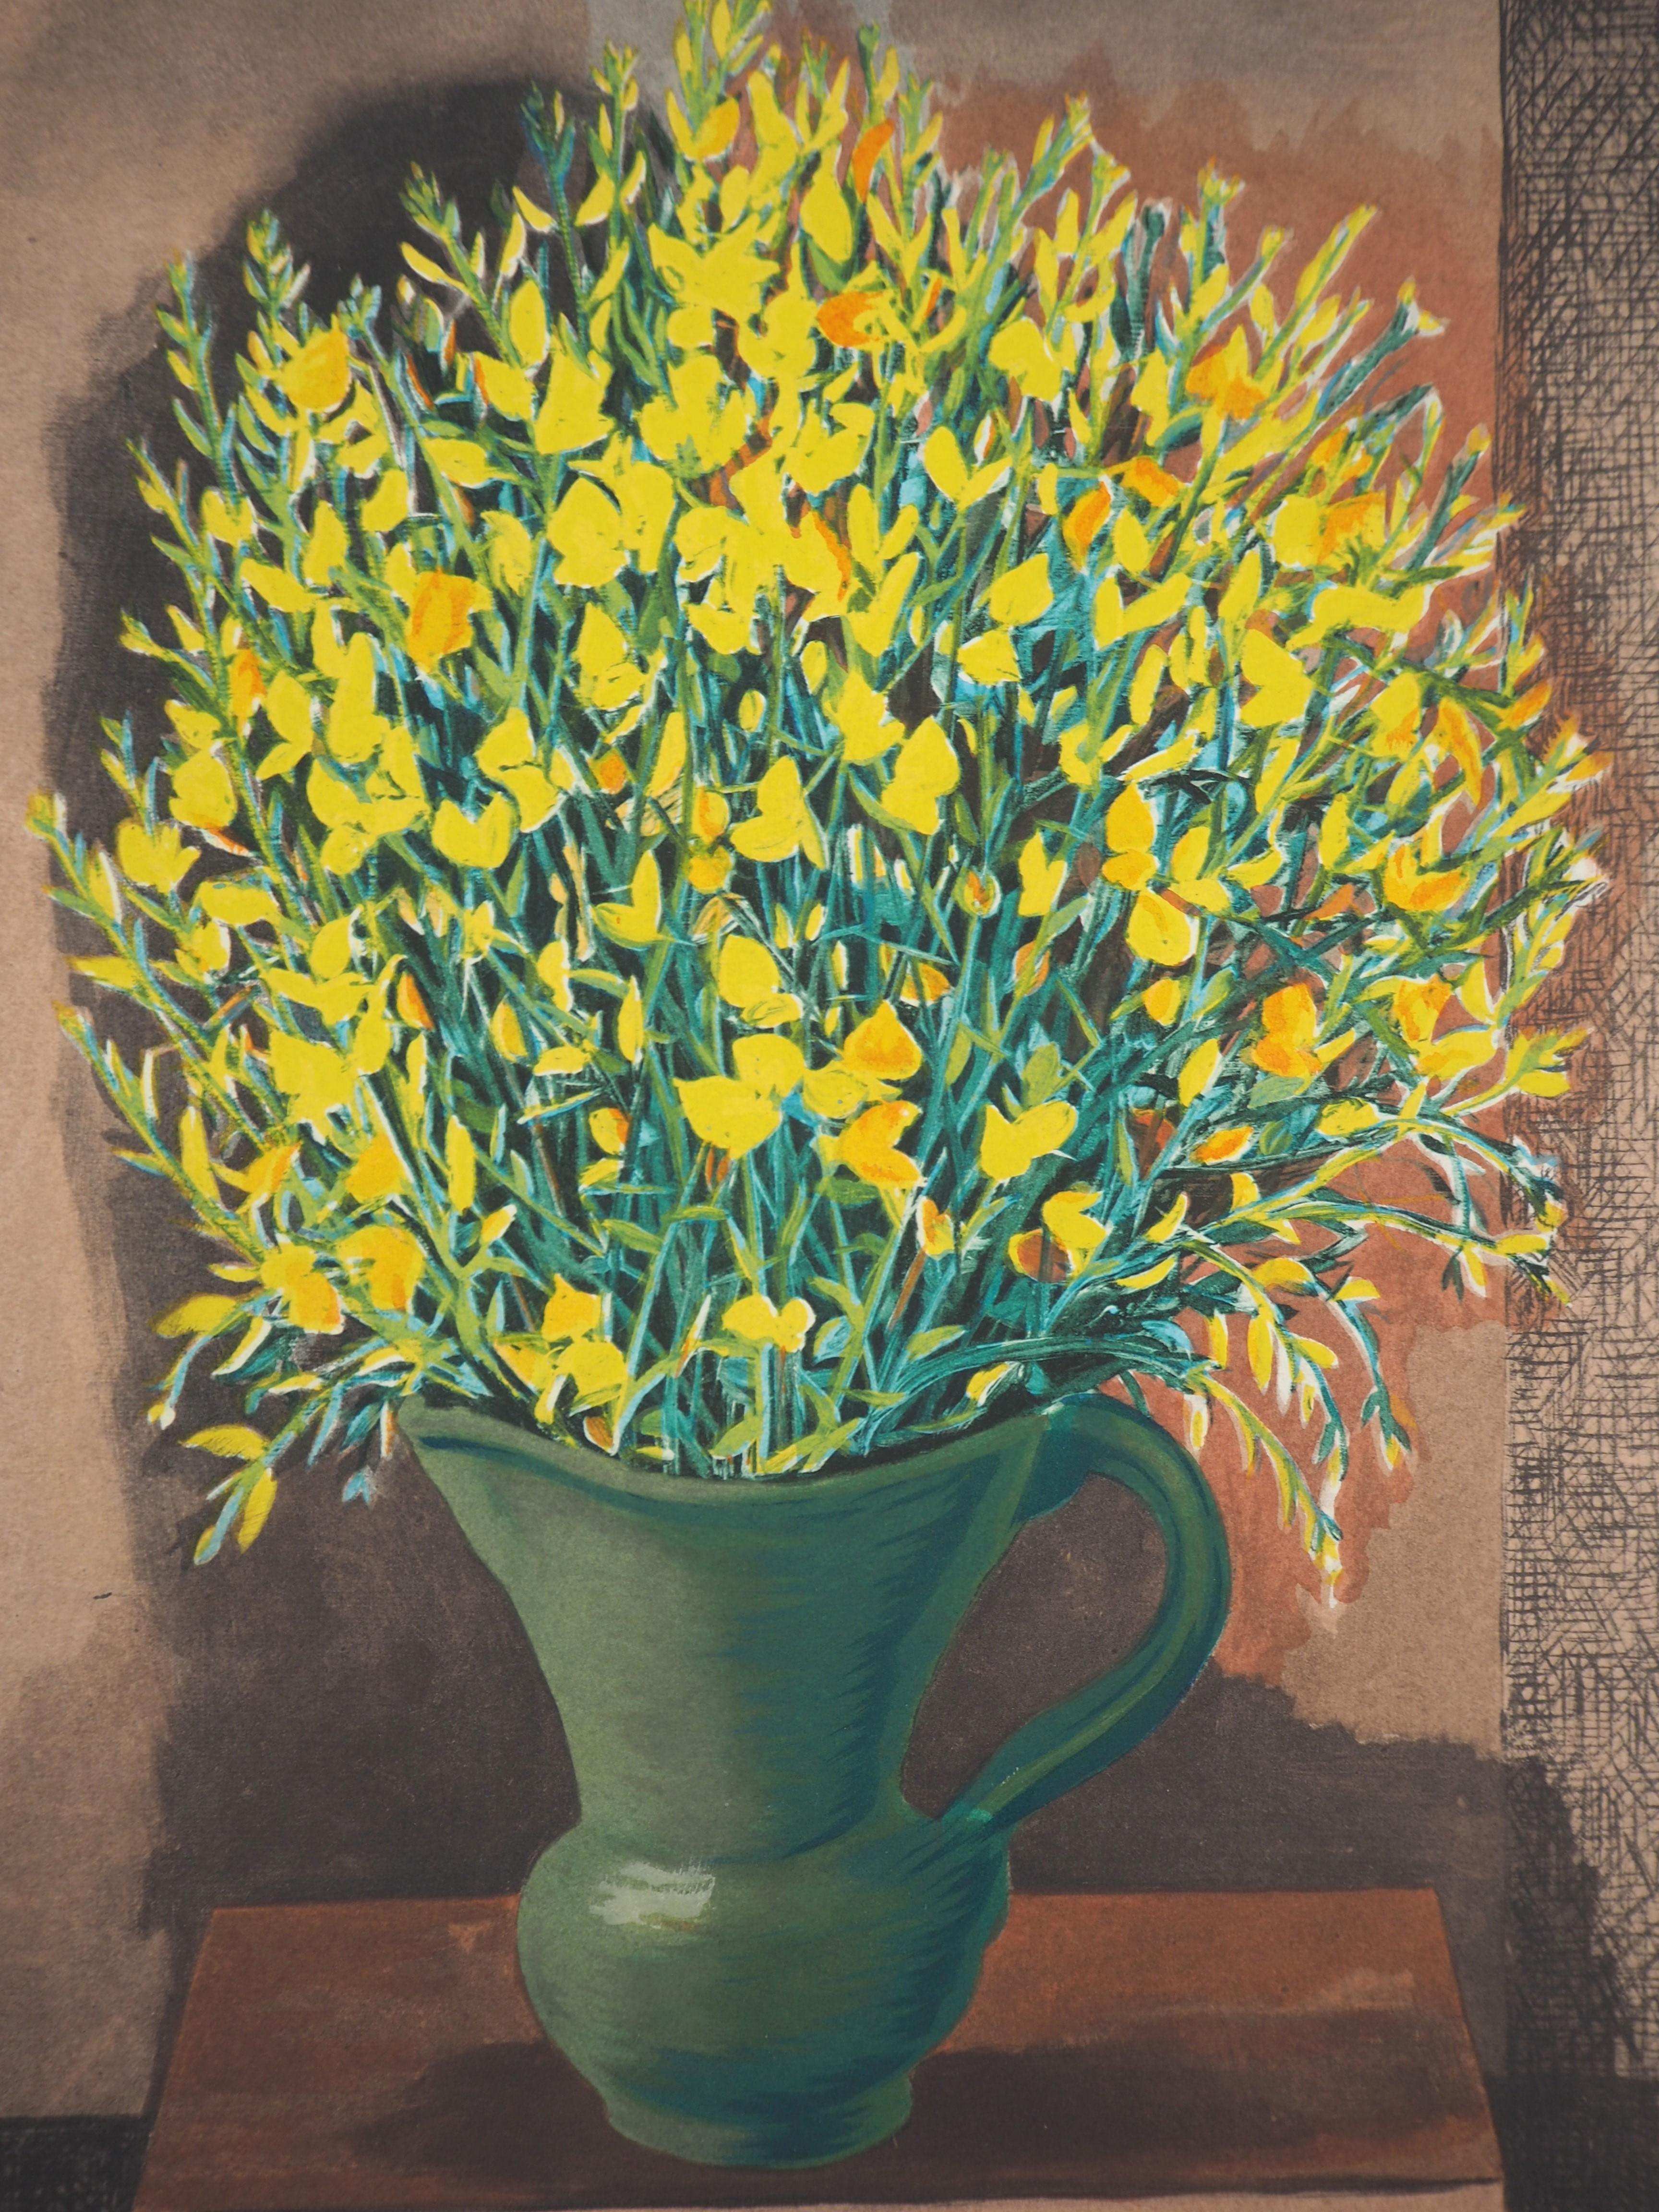 Bouquet of Yellow Wild Flowers - Original Lithograph - Print by Moise Kisling